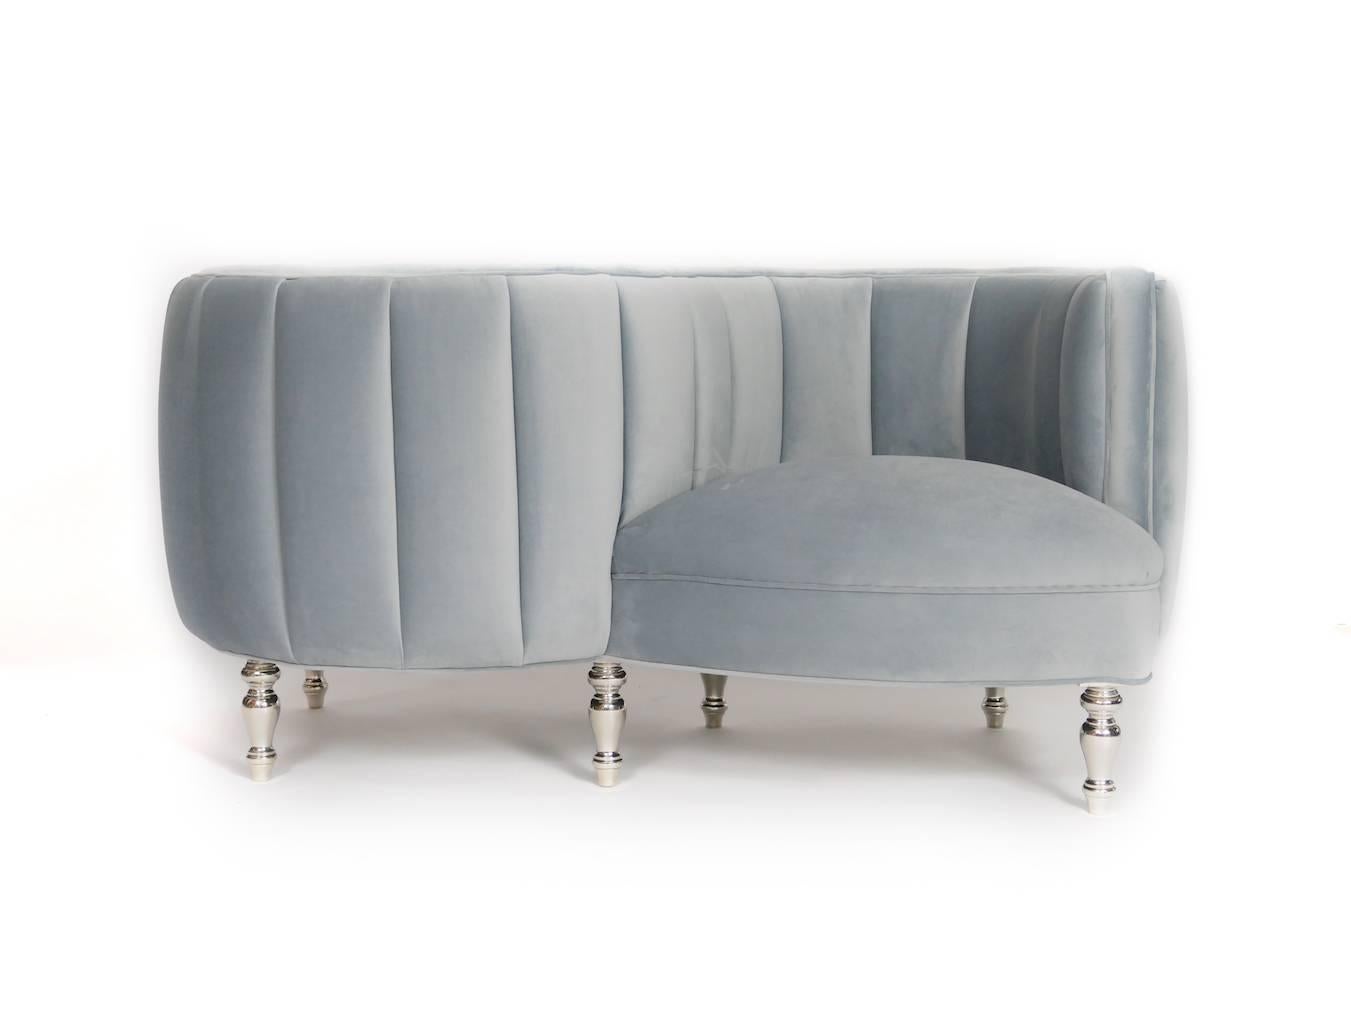 This classic Napoleon III style armchair or tête-à-tête has been restyled. It is the
perfect conversation piece. We have used white bronze legs and added a modern
touch to the upholstery. The settee has silver/grey velvet upholstery.  Can be made